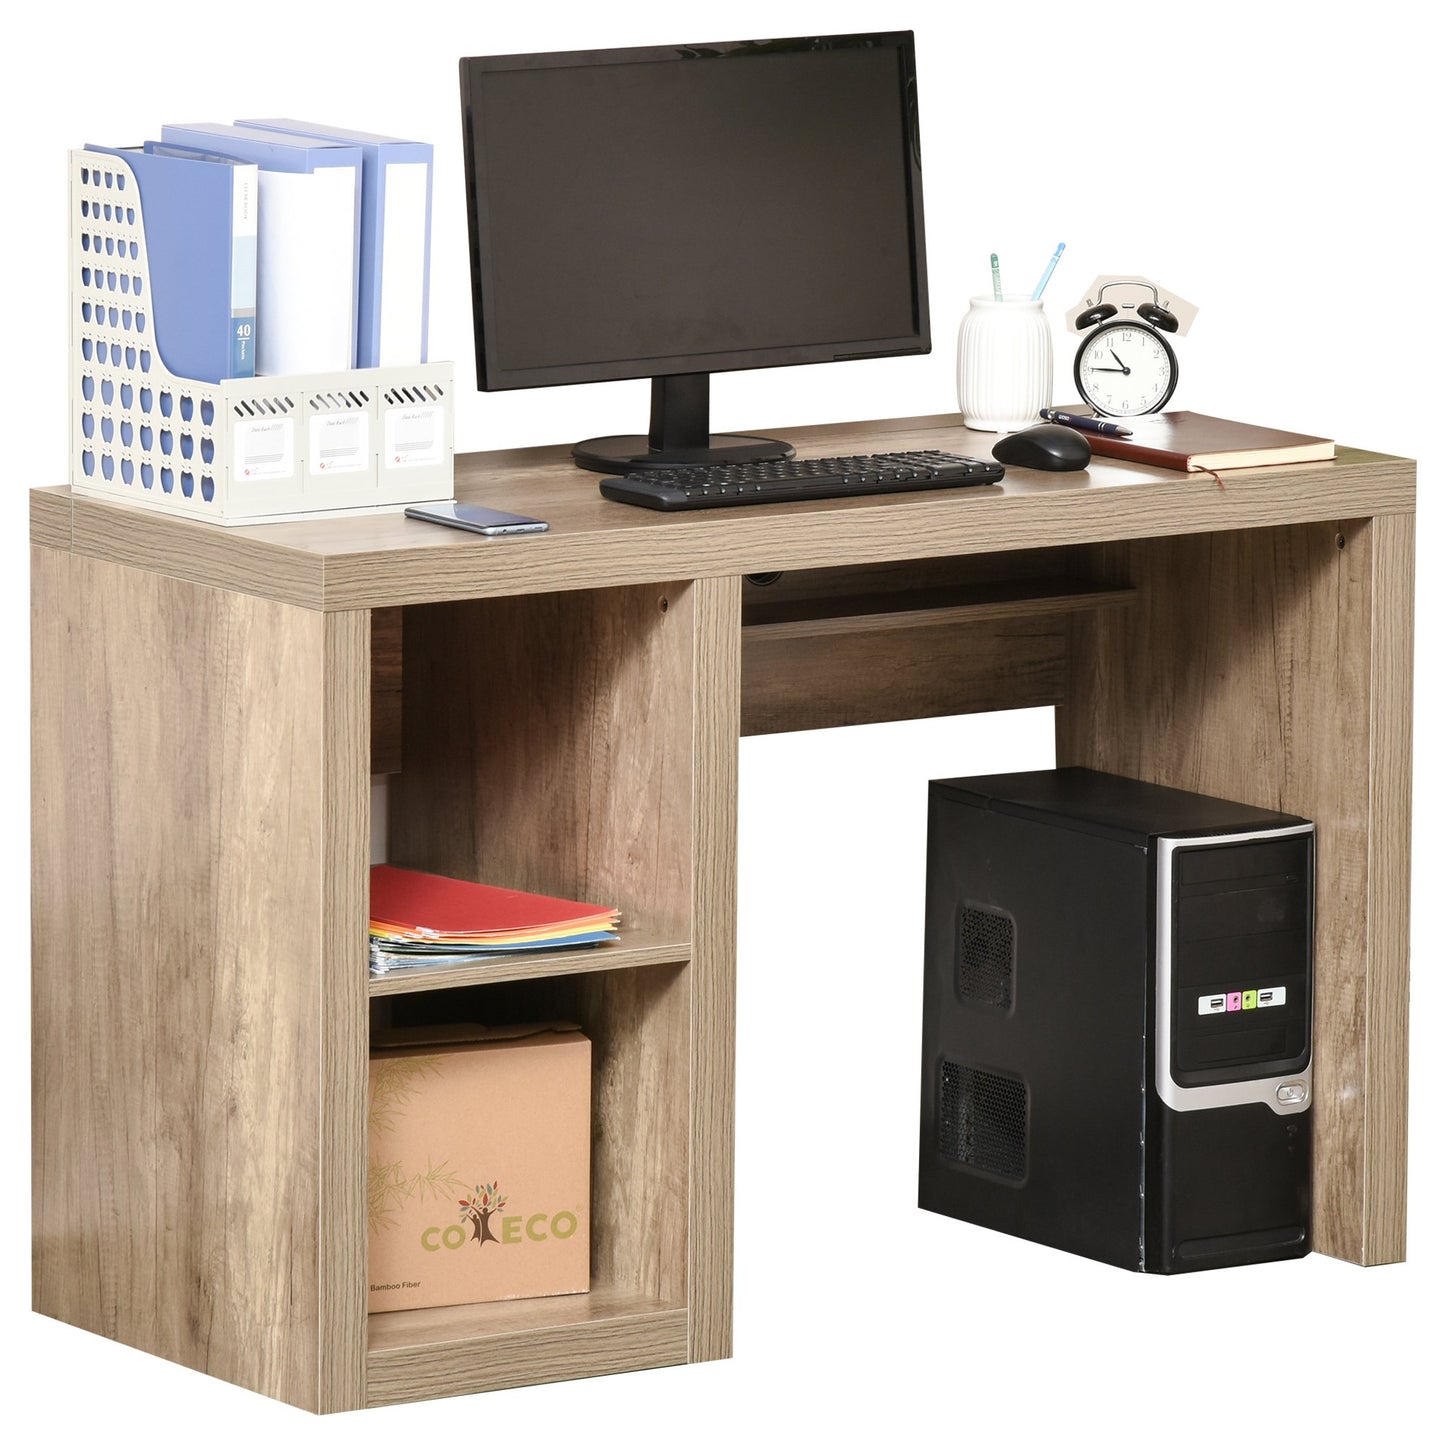 HOMCOM Rectangle Computer Desk Thick Board with Shelves Home Office Table, Wood Color